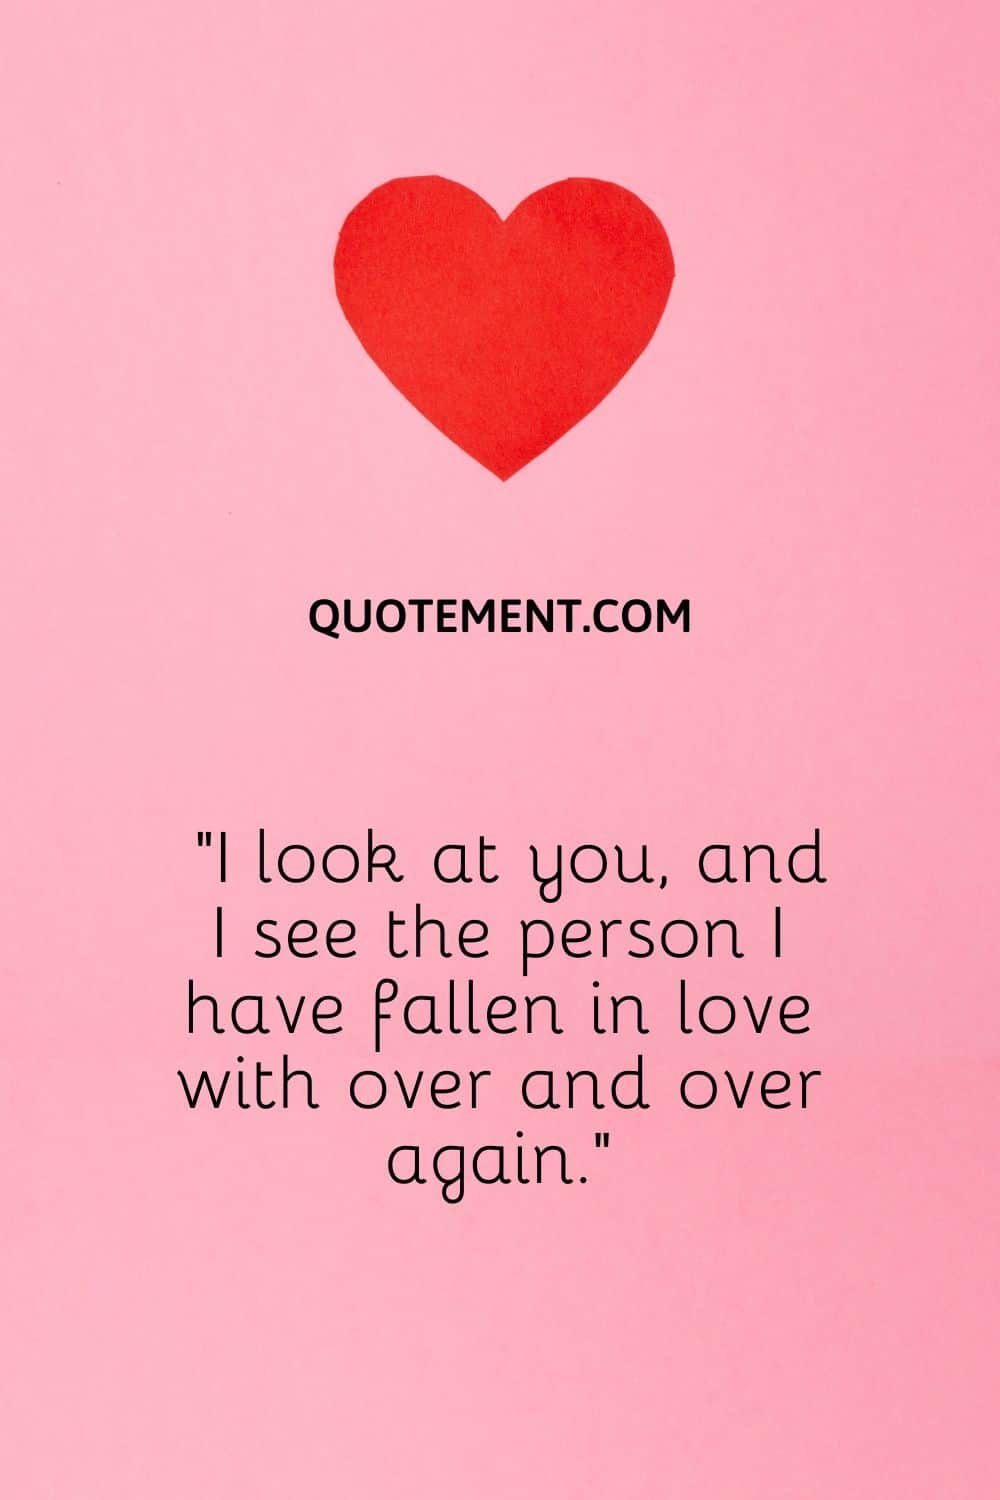 I see the person I have fallen in love with over and over again